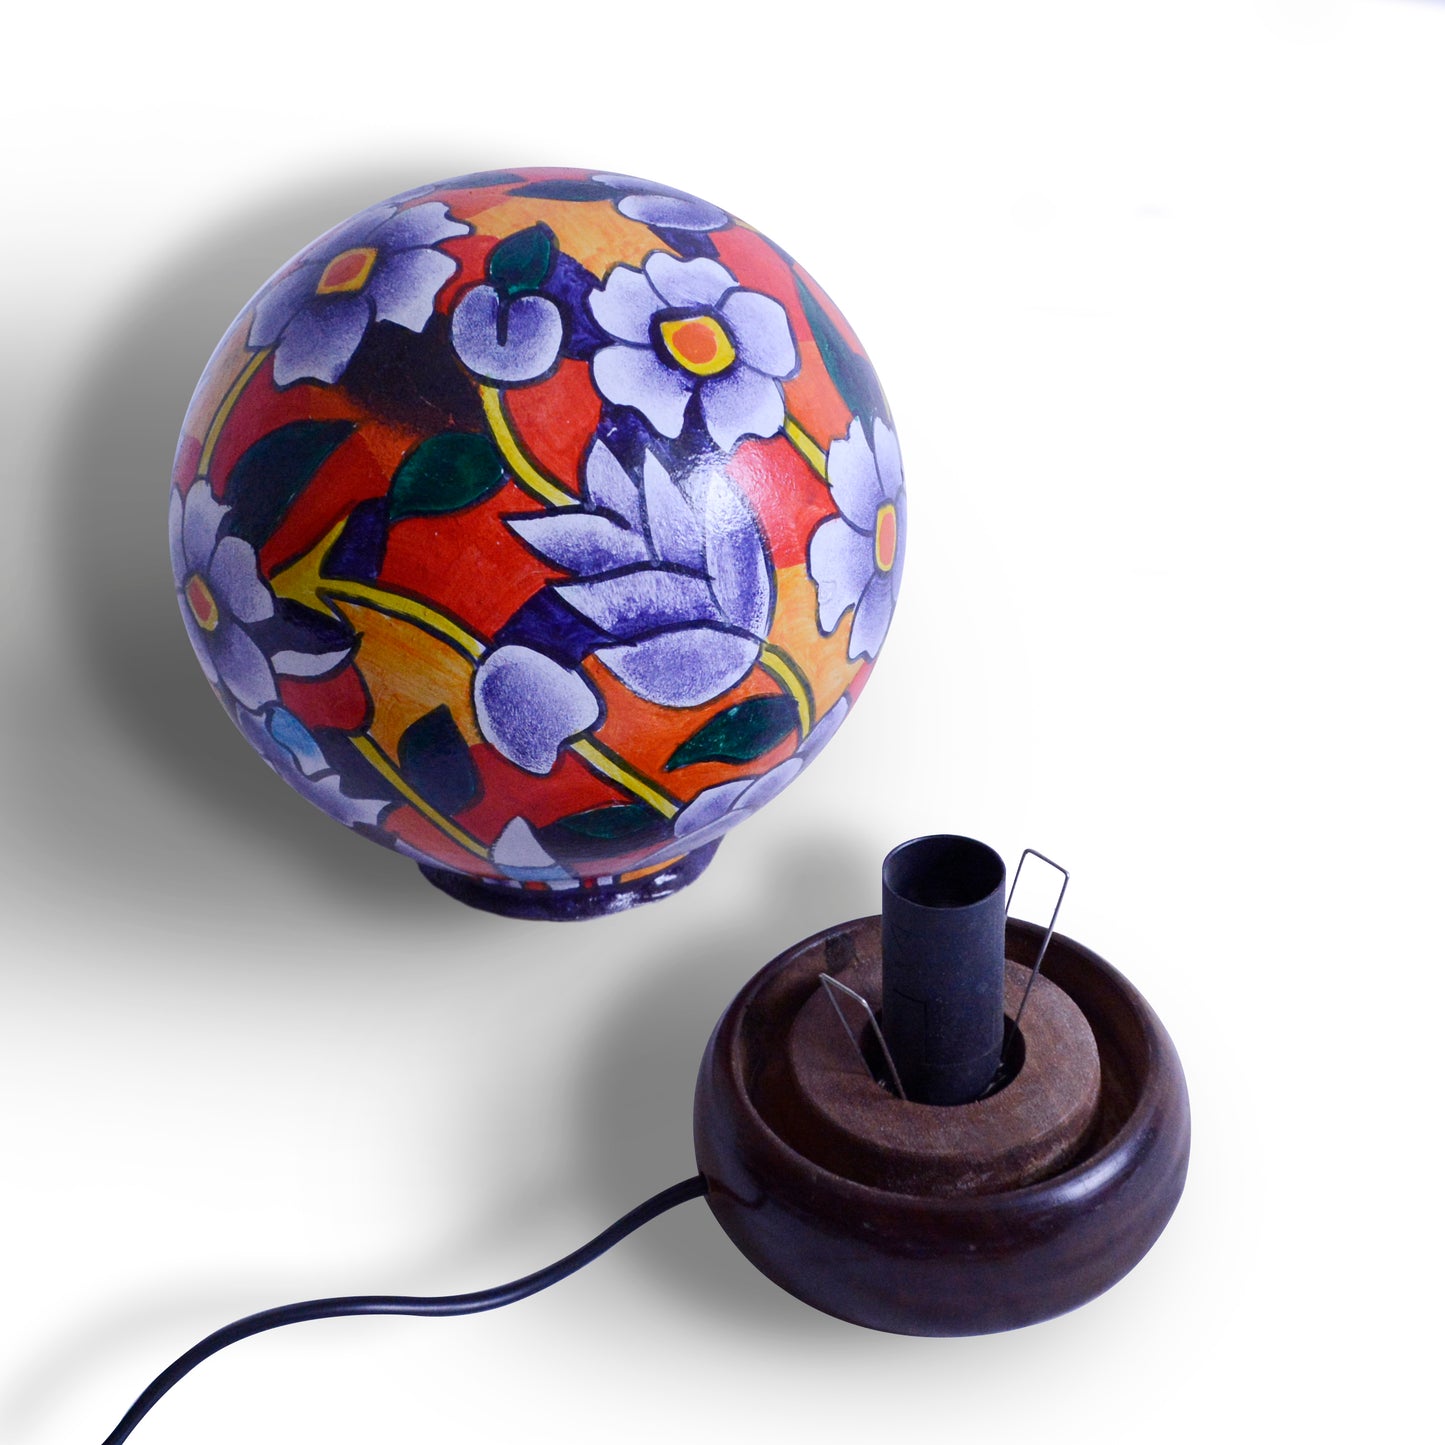 Miracle Garden – Hand painted camel skin lamp